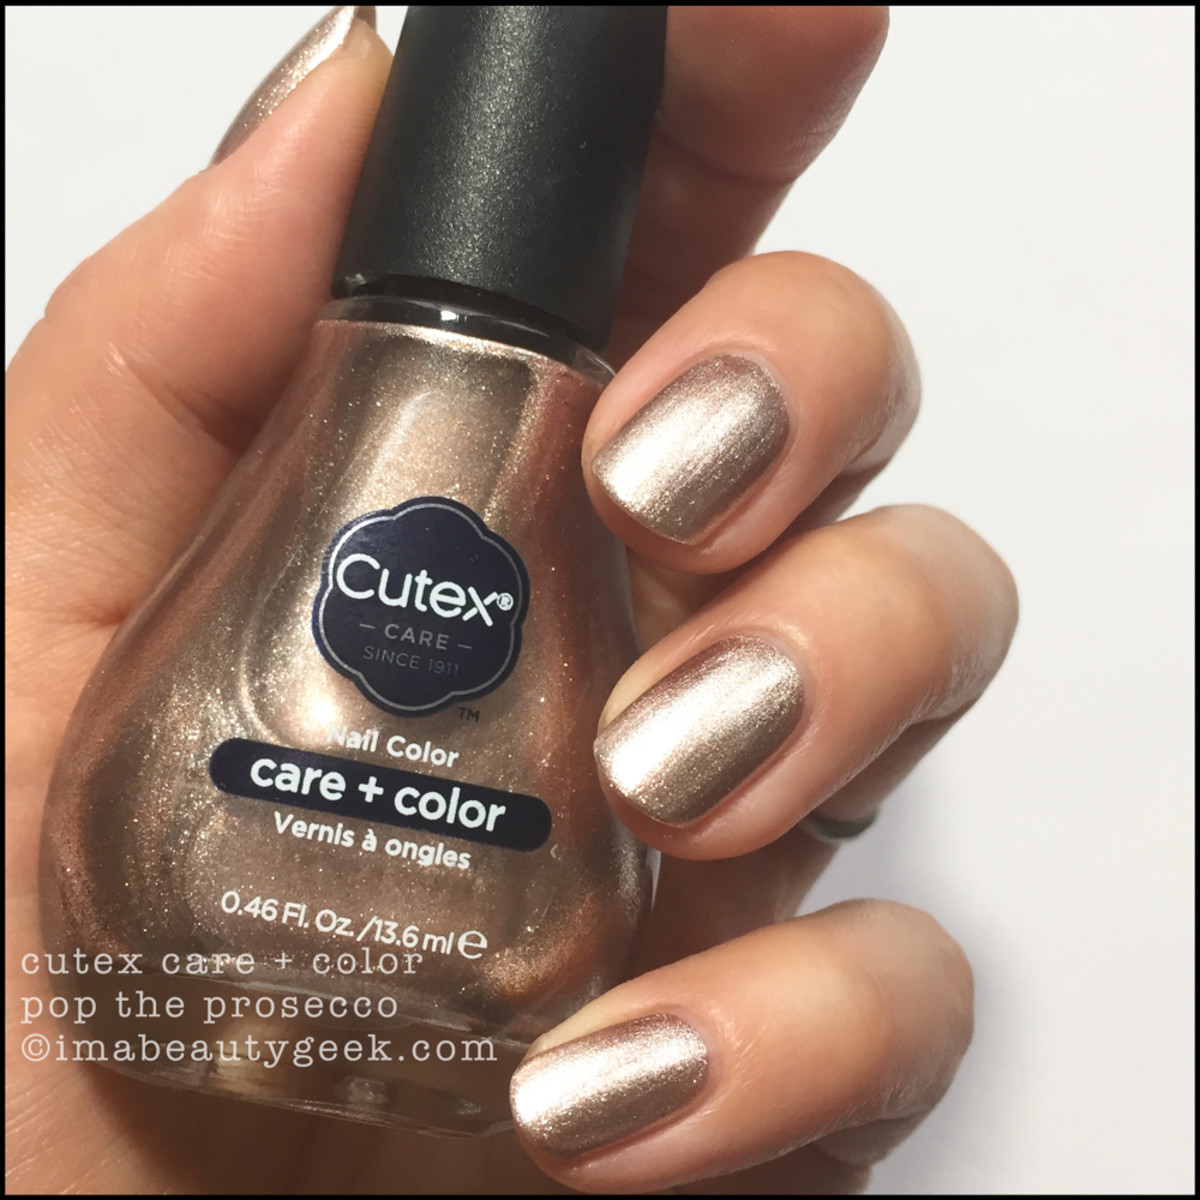 Cutex Pop the Prosecco - Cutex 2017 Swatches Review